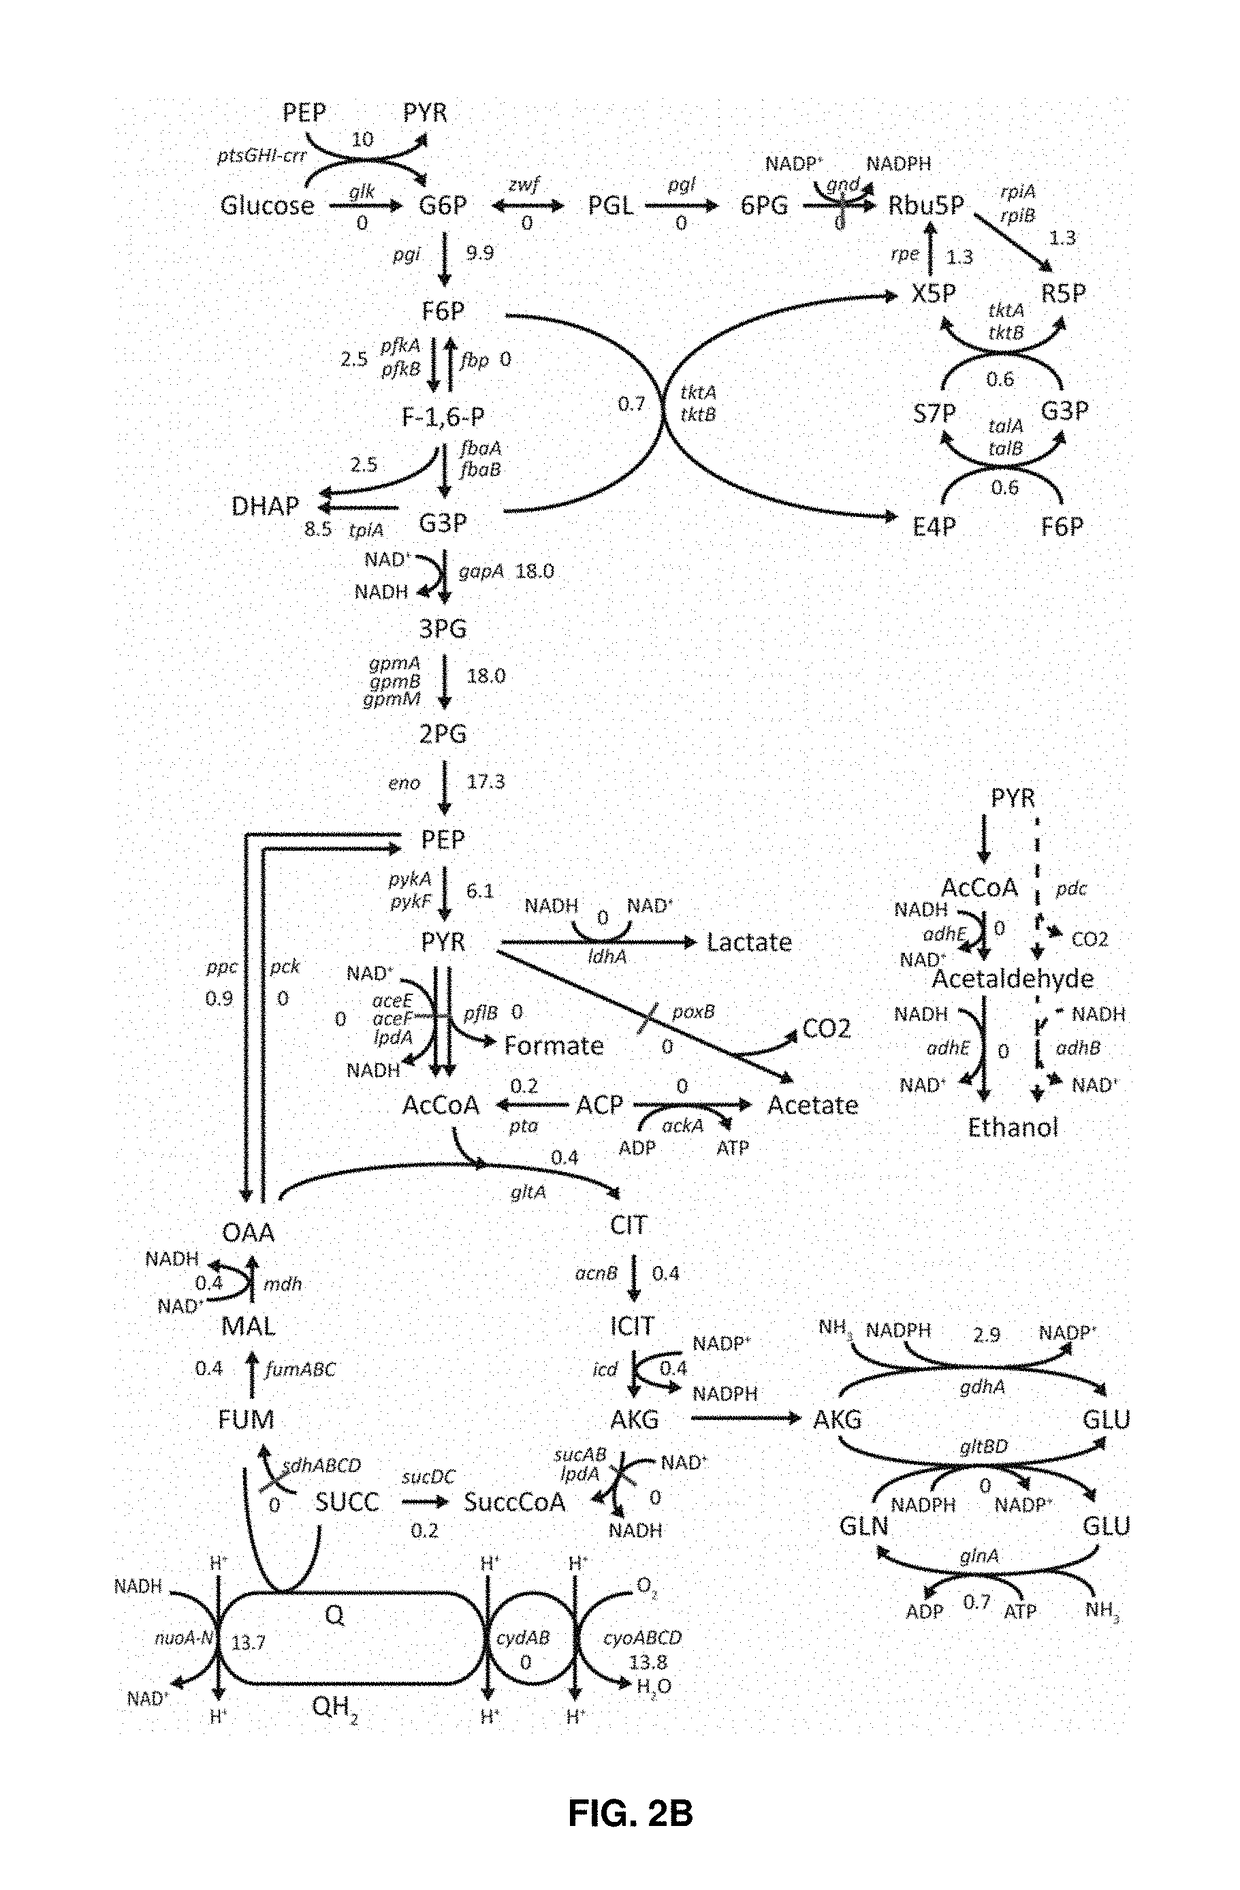 Microorganisms and methods for producing pyruvate, ethanol, and other compounds